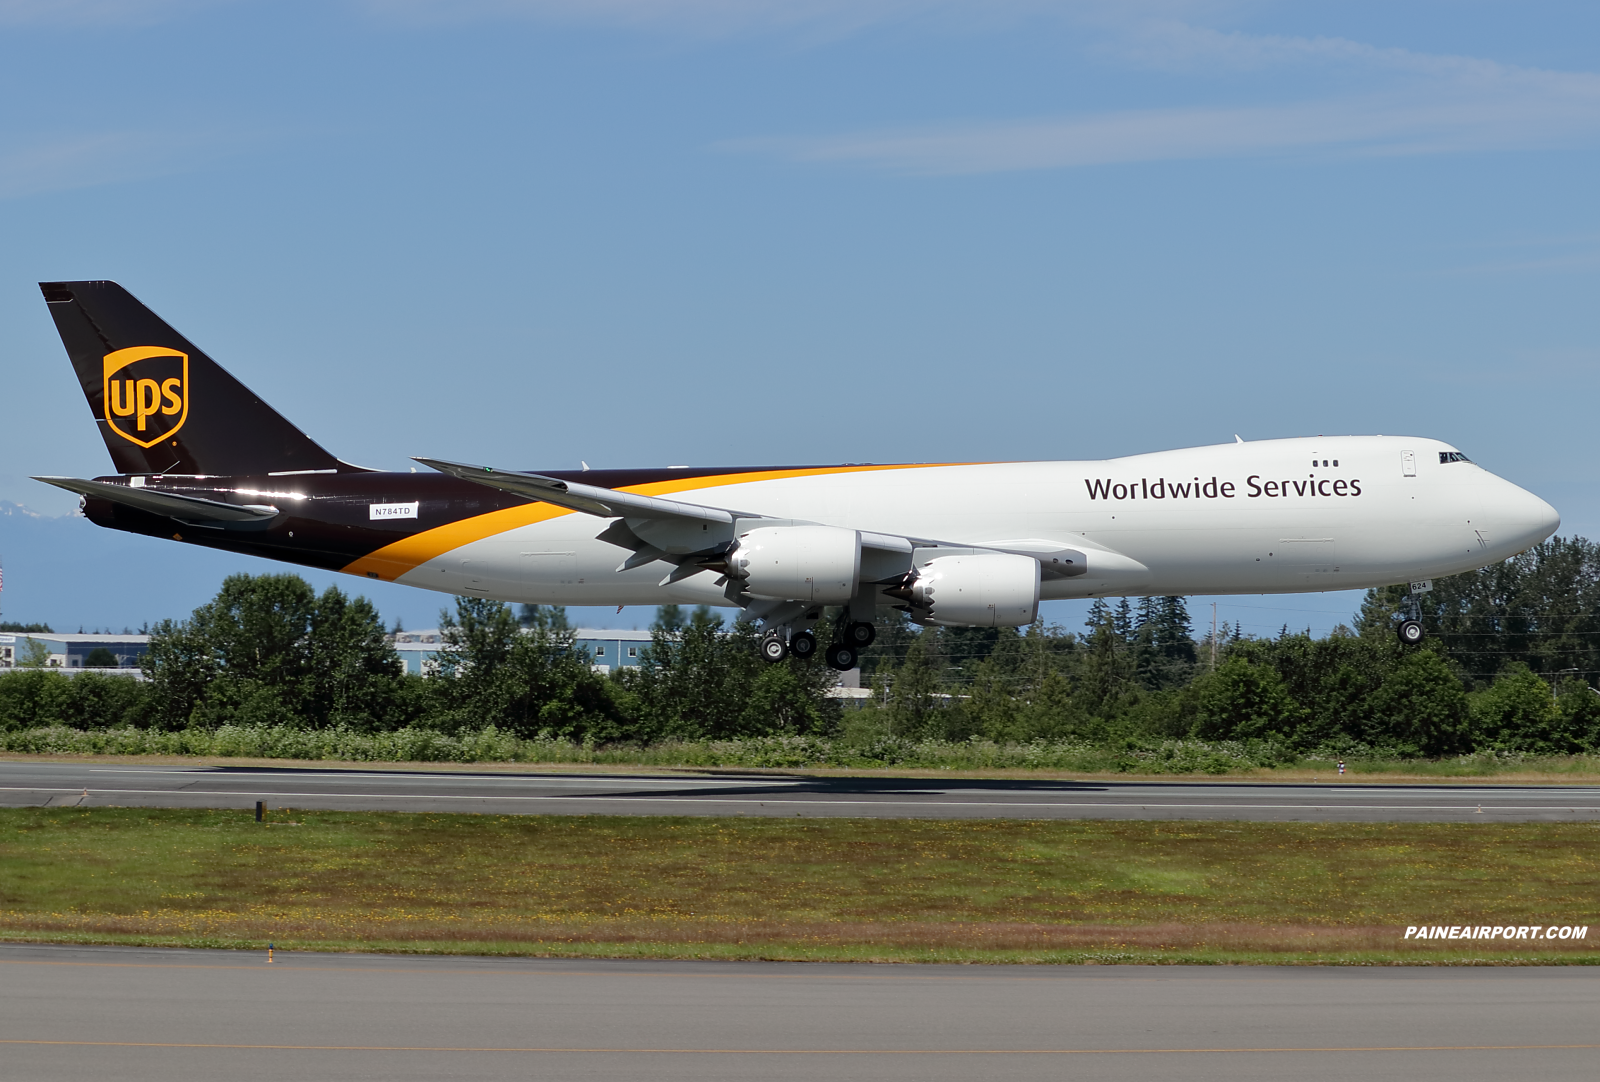 UPS 747-8F N624UP at KPAE Paine Field